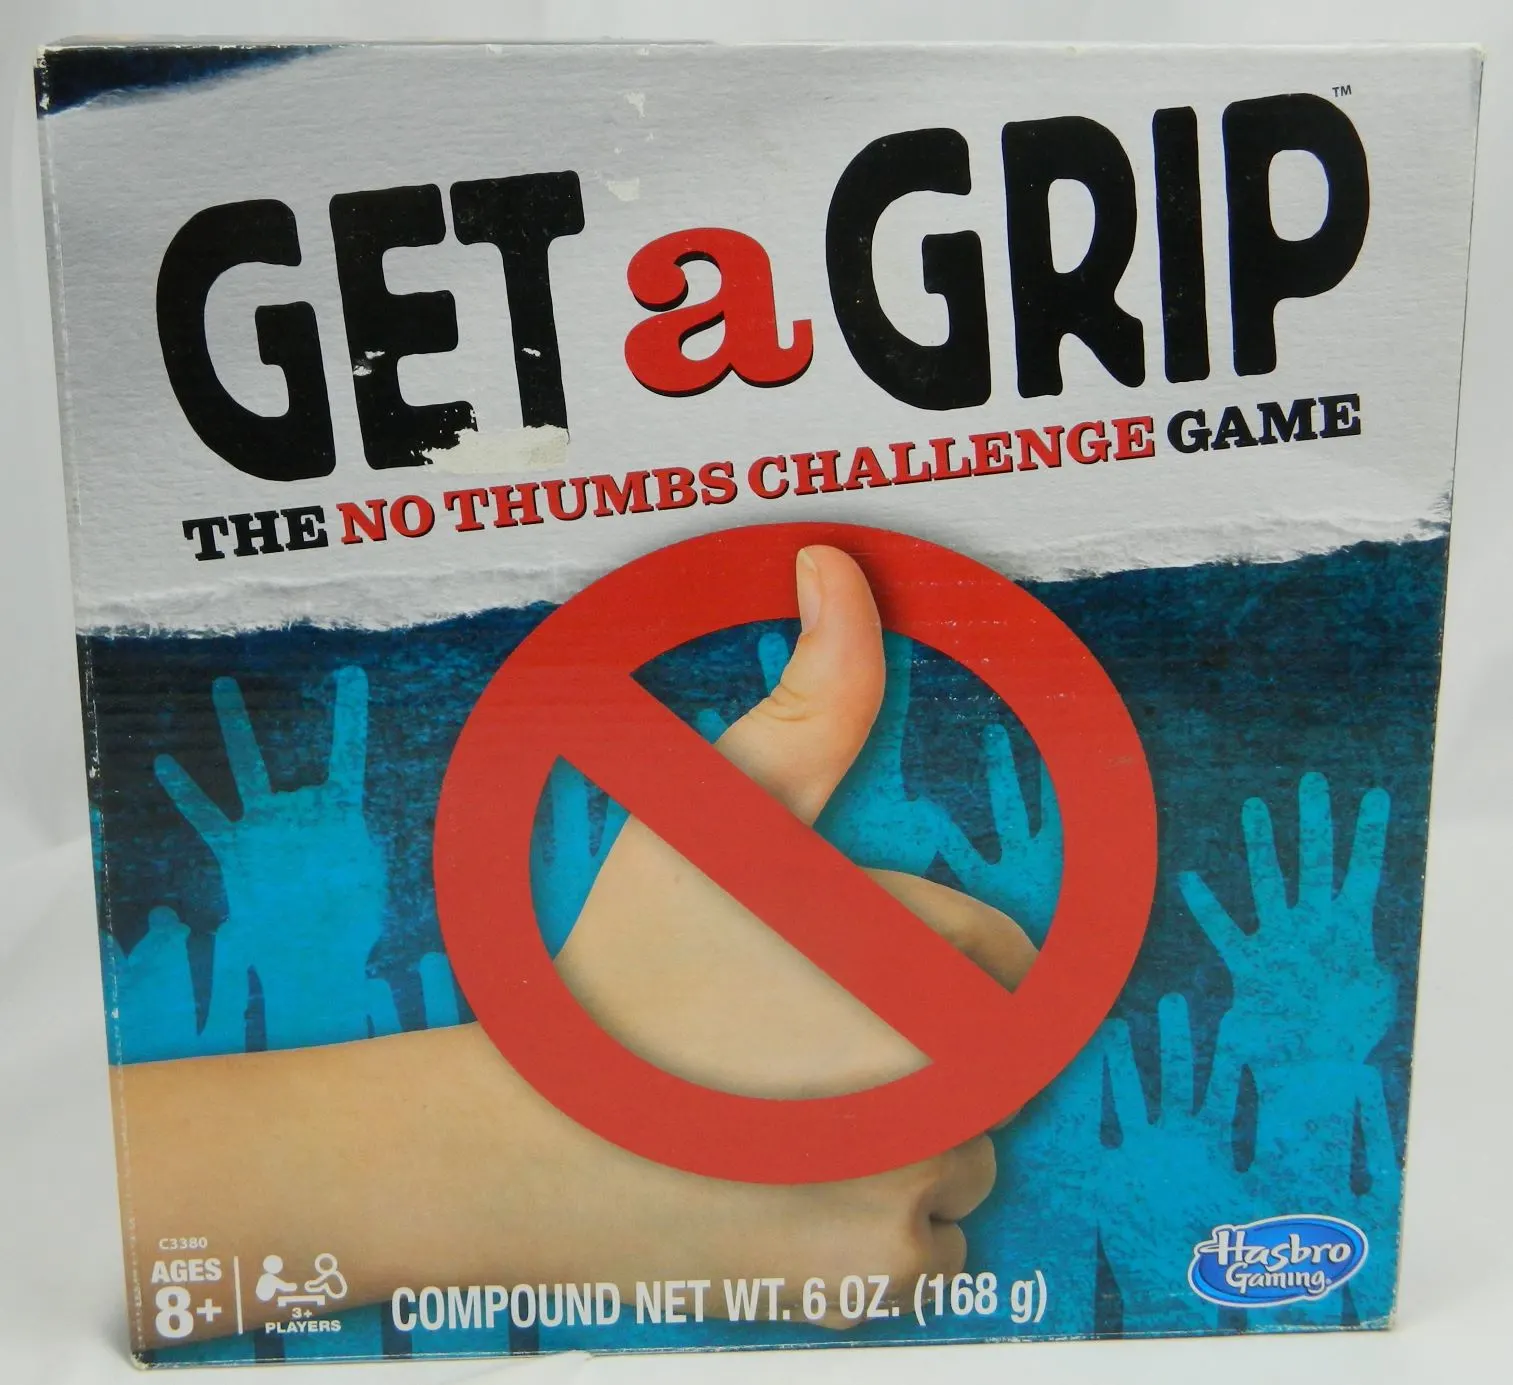 Box for Get A Grip